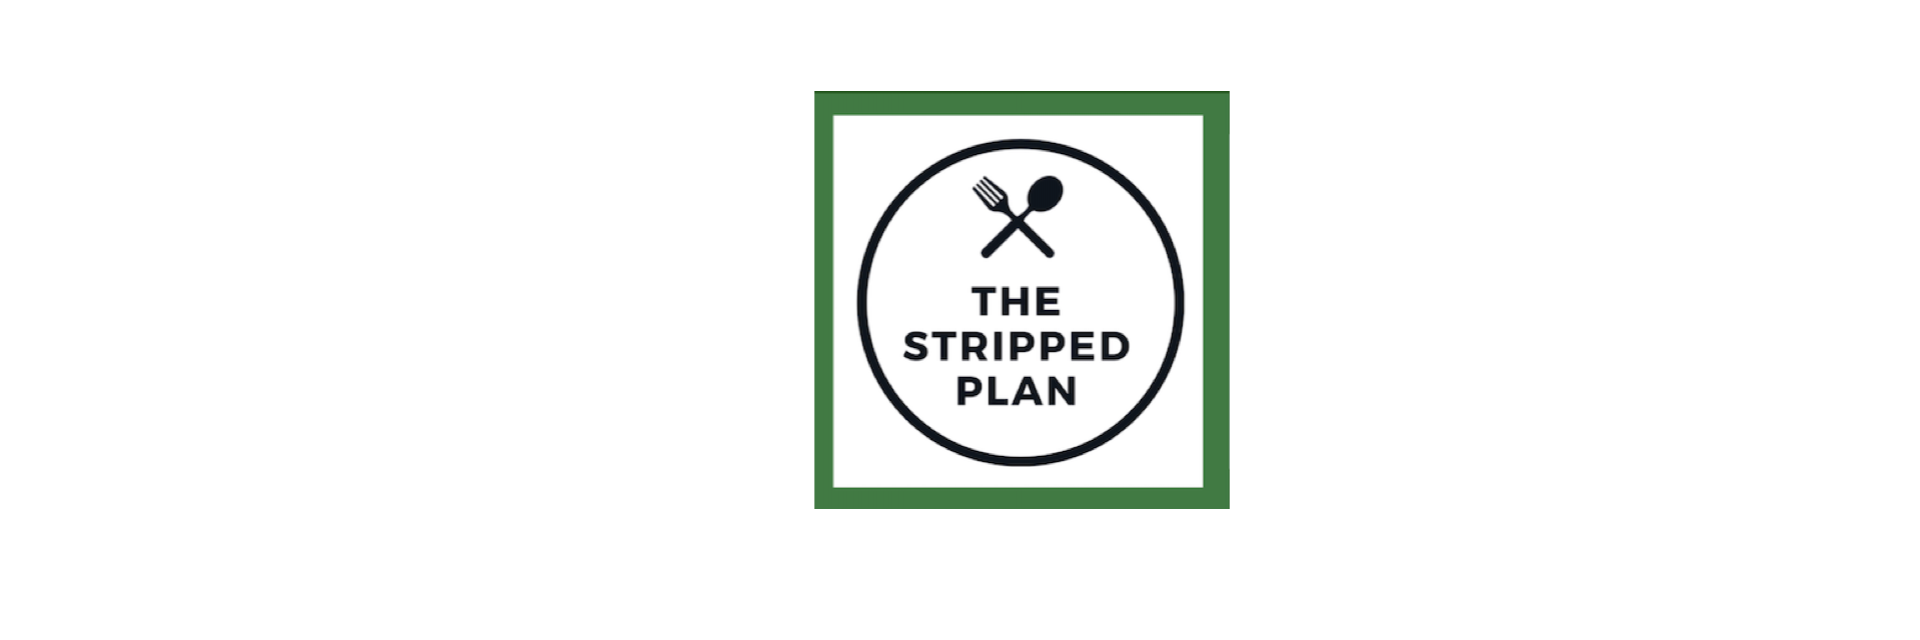 Join us on The Stripped Plan!